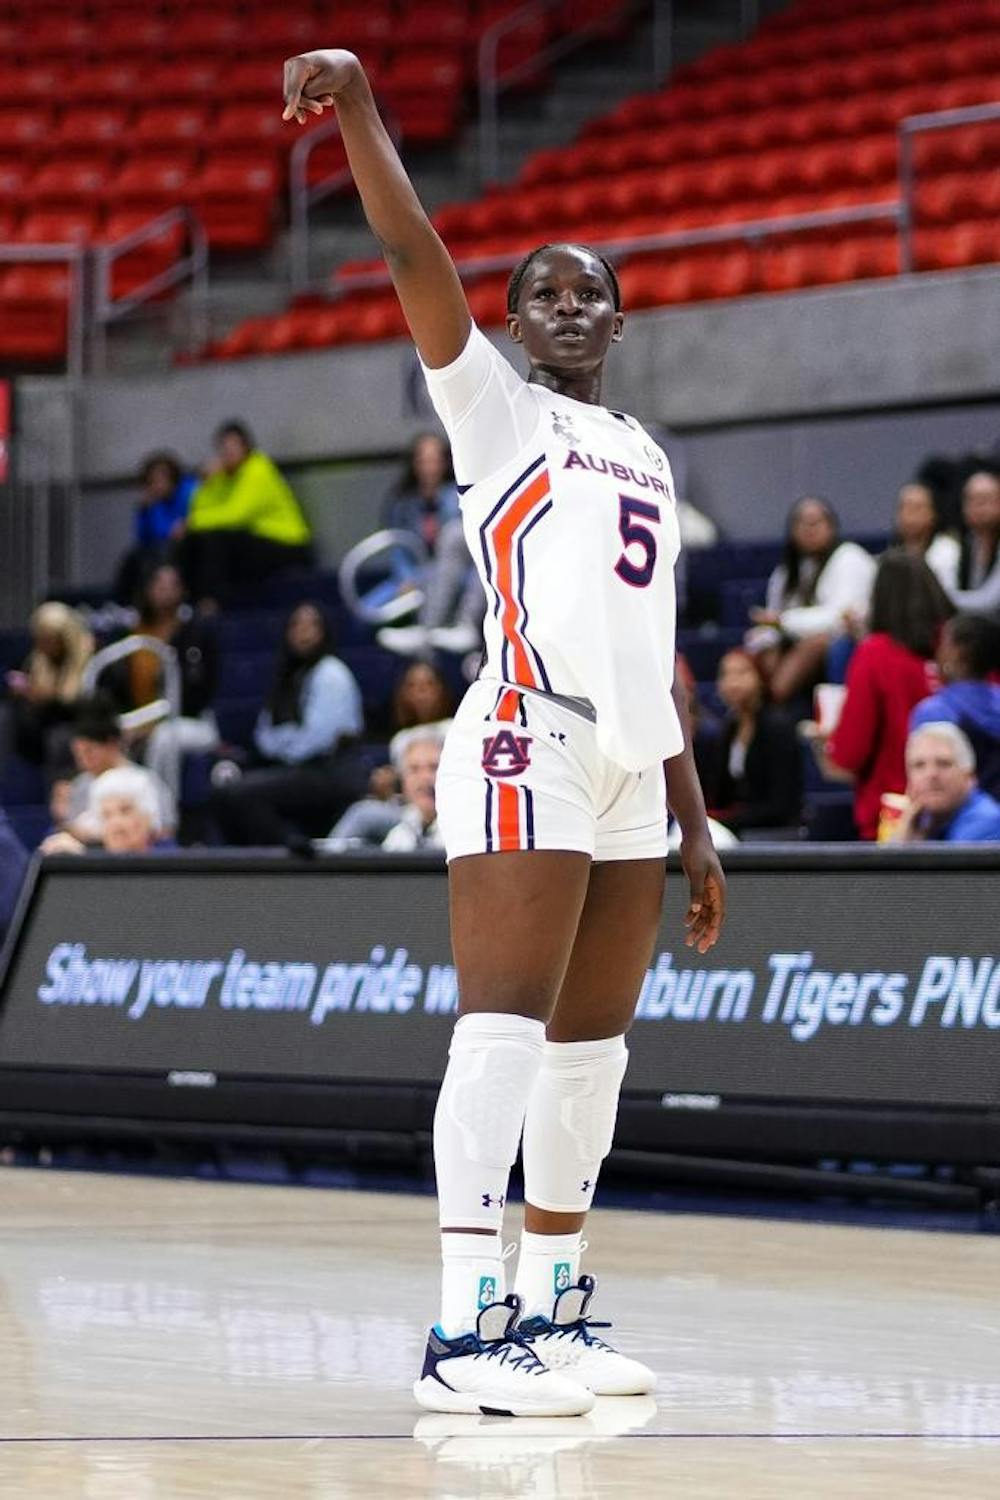 Aicha Coulibaly (5) during the game between the Tuskegee Golden Tigers and the Auburn Tigers at Neville Arena in Auburn, AL on Thursday, Nov 3, 2022. Zach Bland/Auburn Tigers